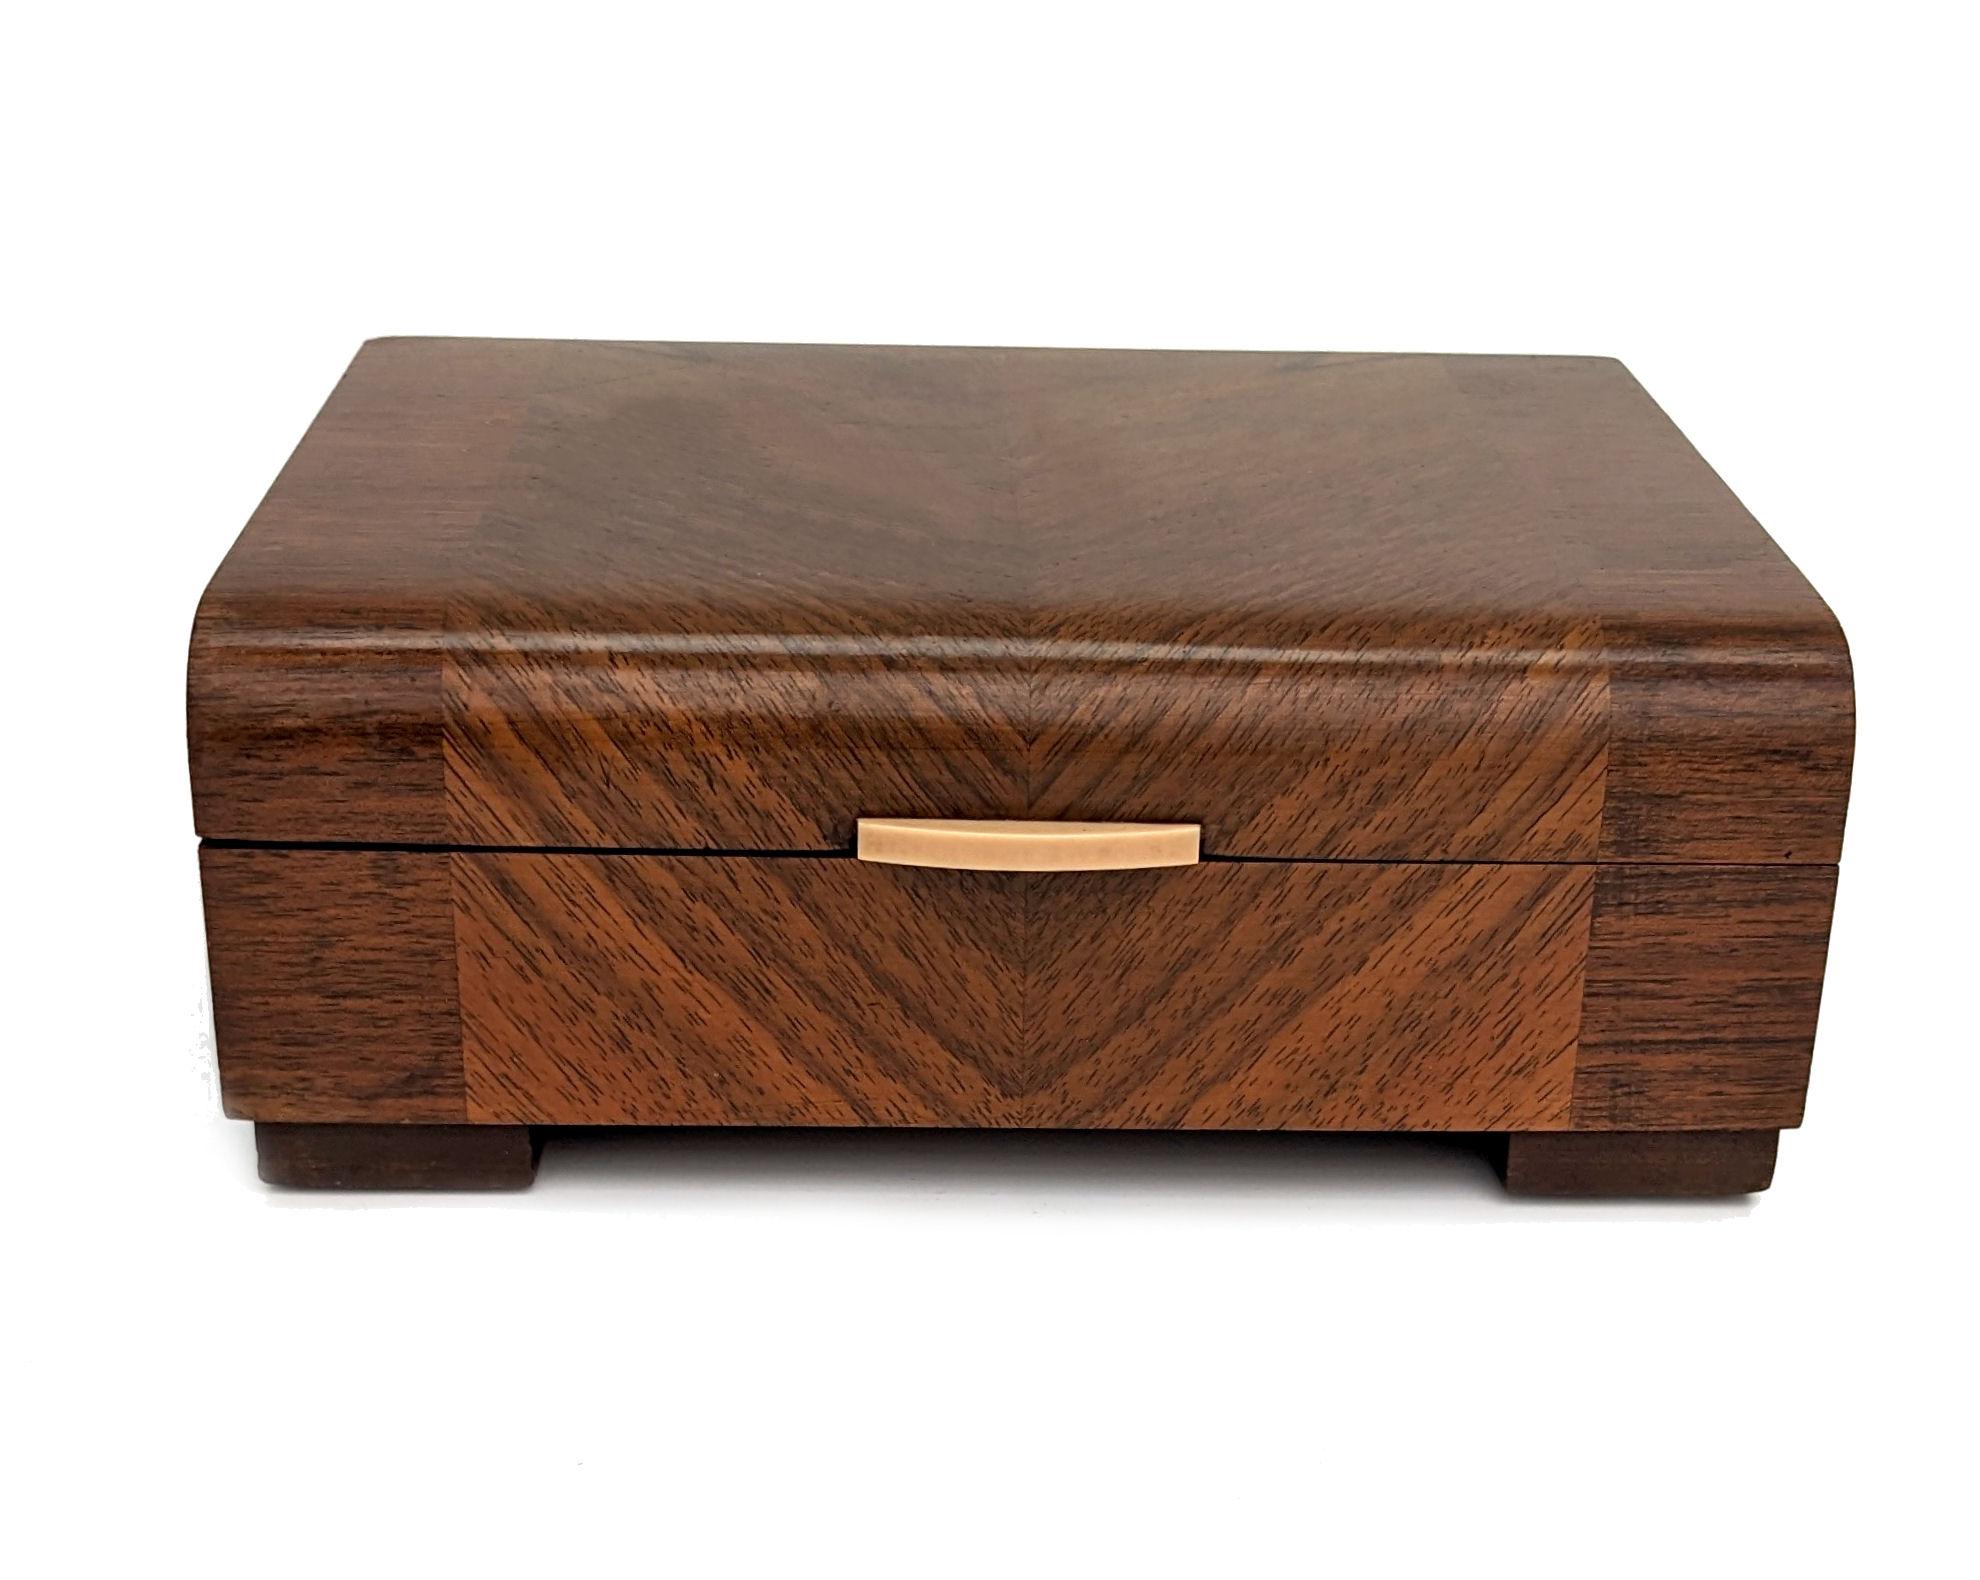 For your consideration is this superbly iconic Art Deco walnut box with an iconic round shoulder edges and bakelite handle. This box is a great size, larger than normal, making it a very functional piece, many possible uses such as jewellery,